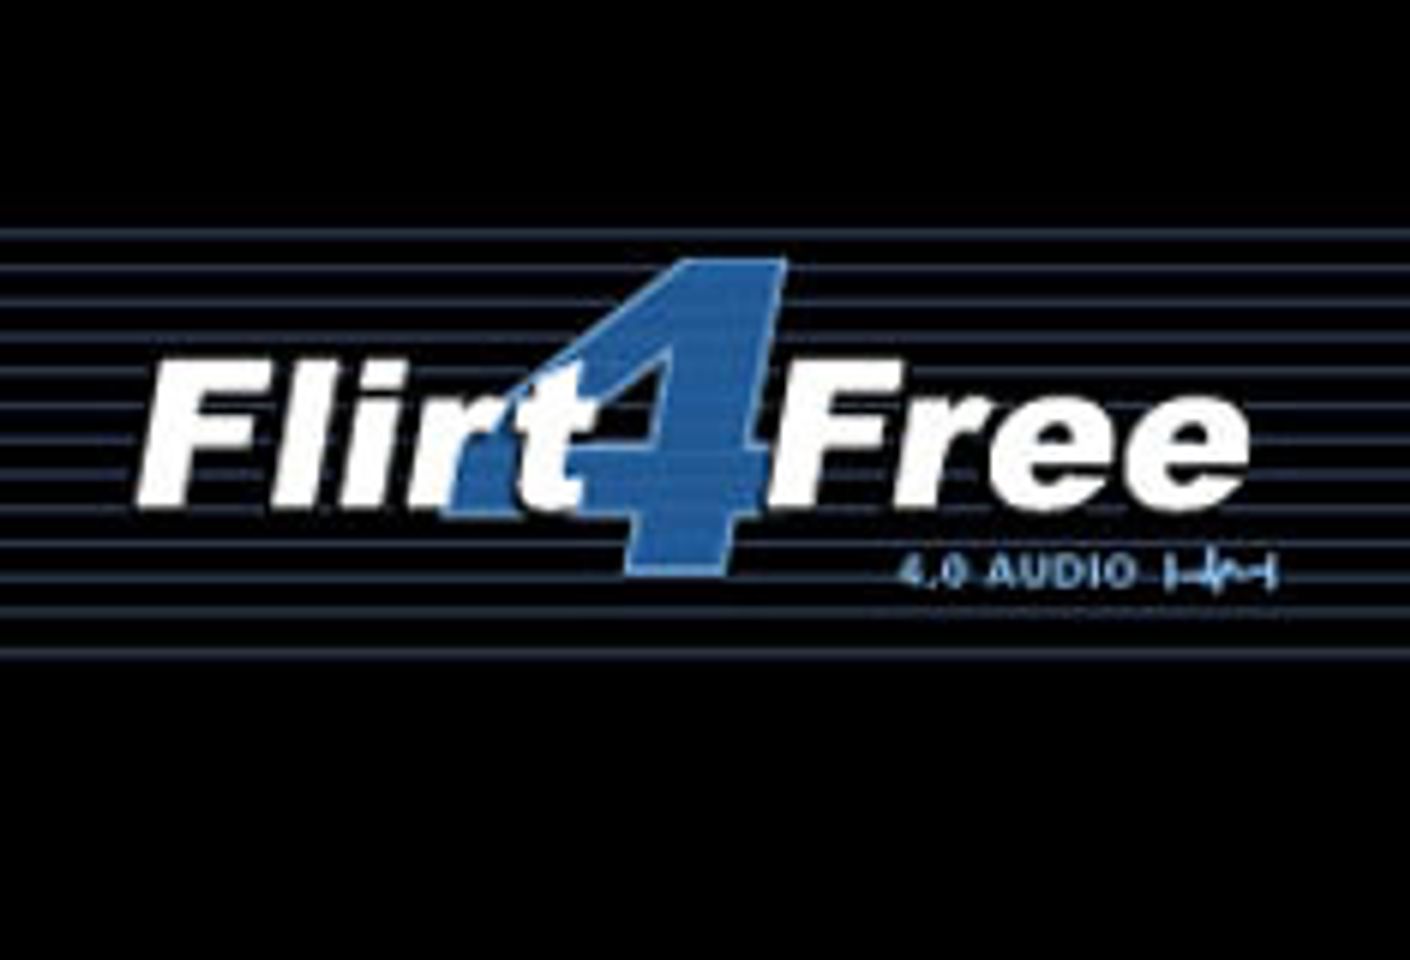 Flirt 4 Free Gay Show Attendance Rises Exponentially